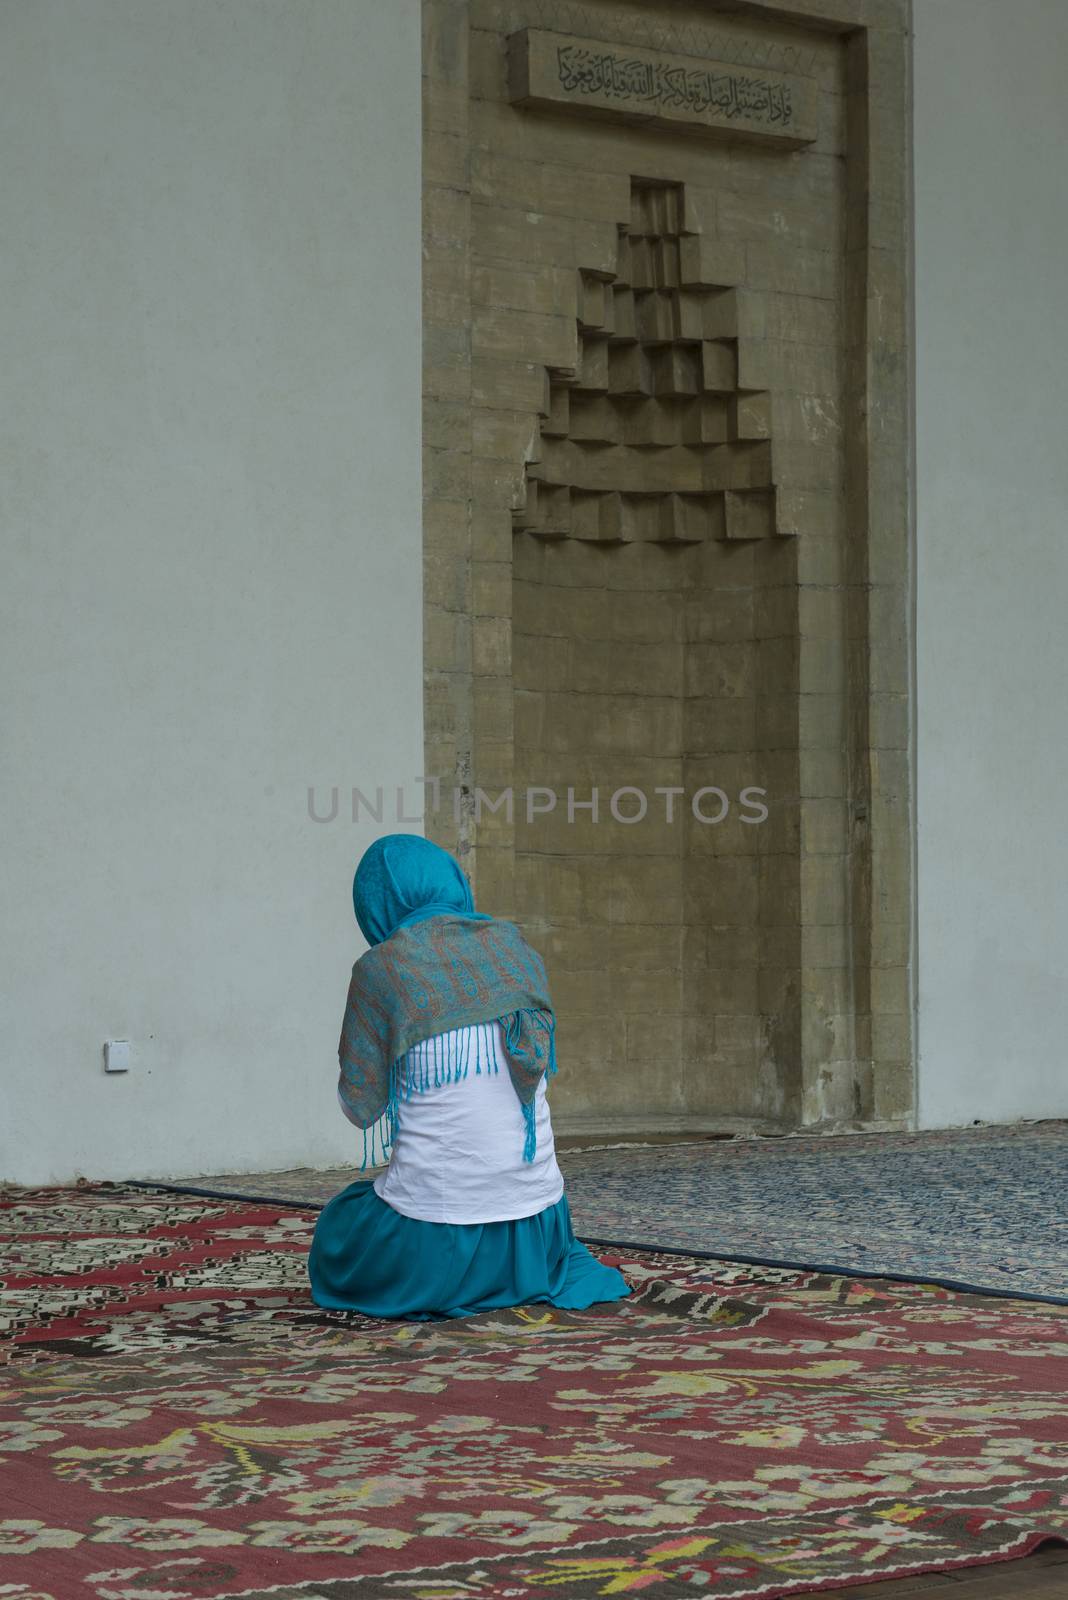 praying in a mosque by sergiodv